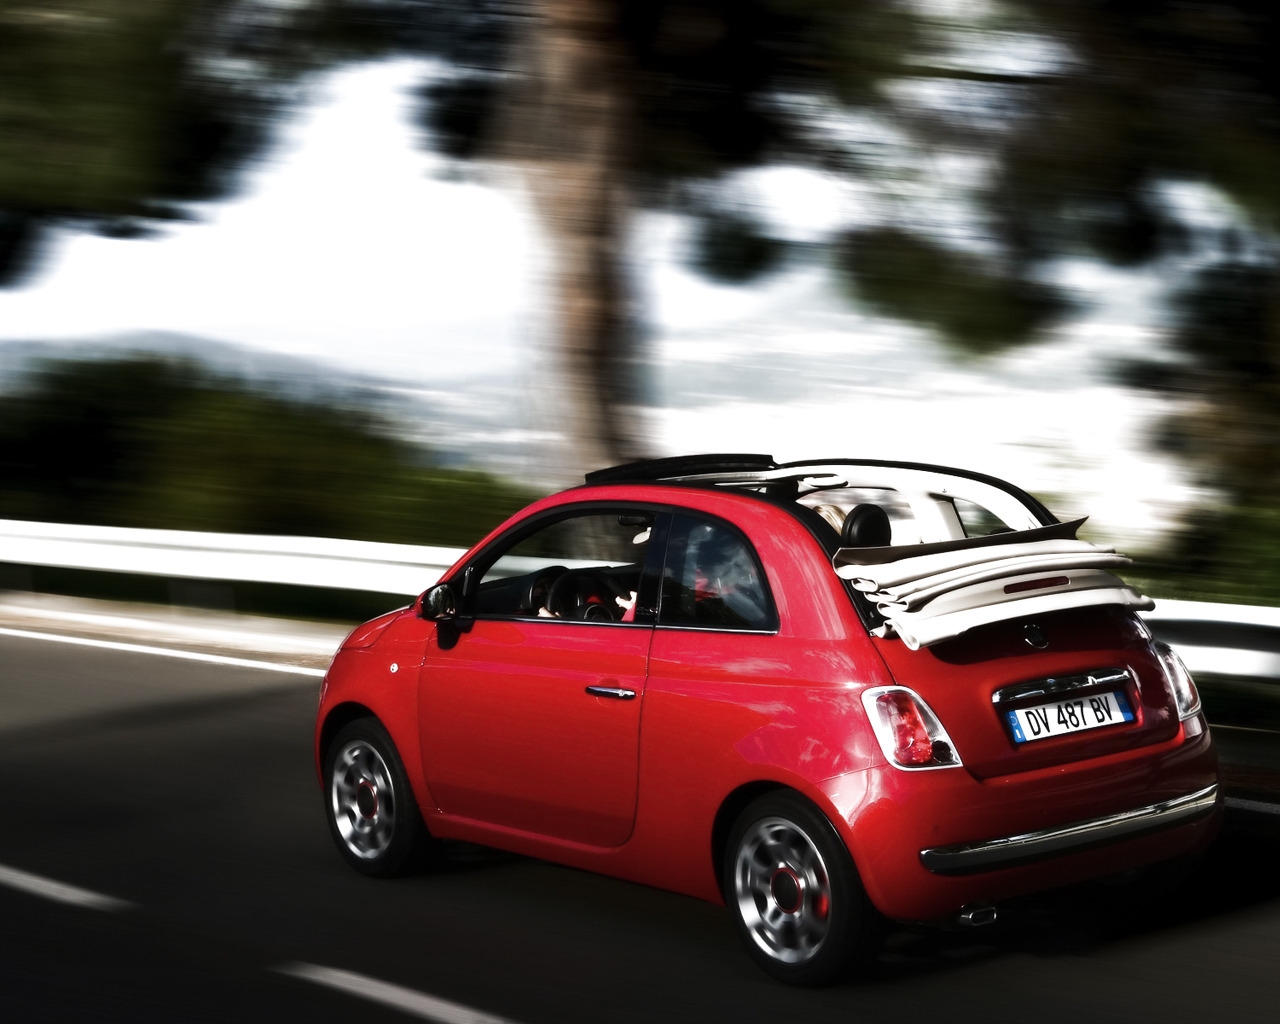 2010 Fiat 500C Speed for 1280 x 1024 resolution